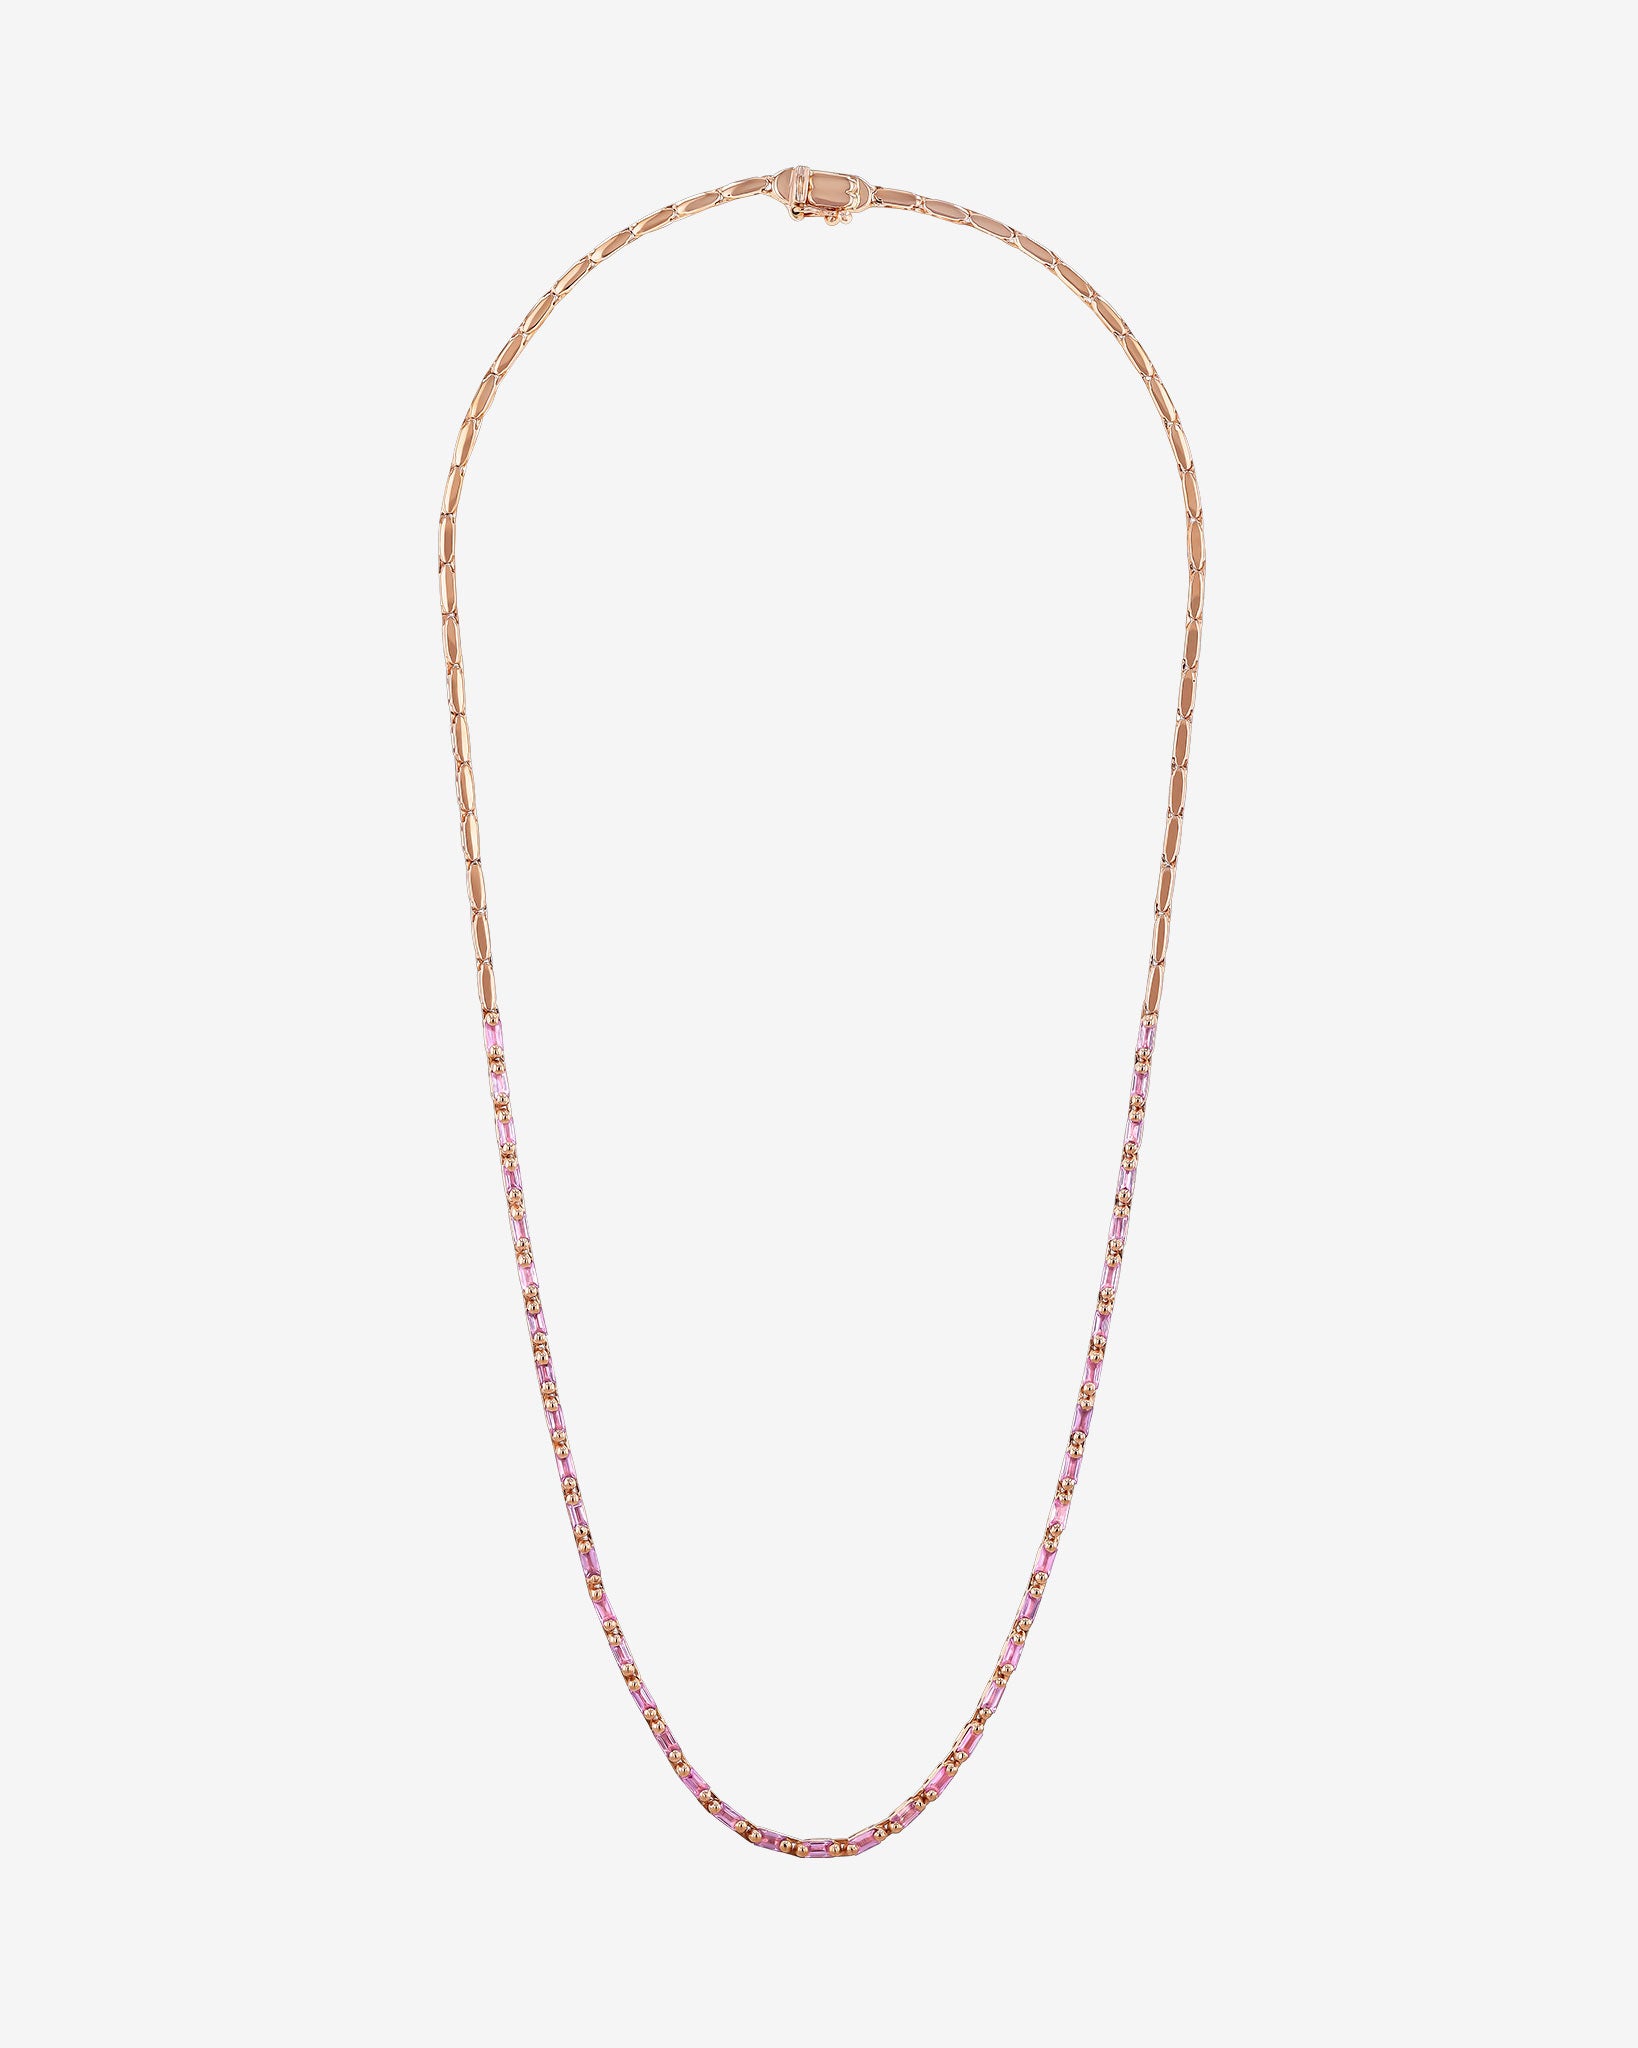 Suzanne Kalan Linear Half Pink Sapphire Tennis Necklace in 18k rose gold